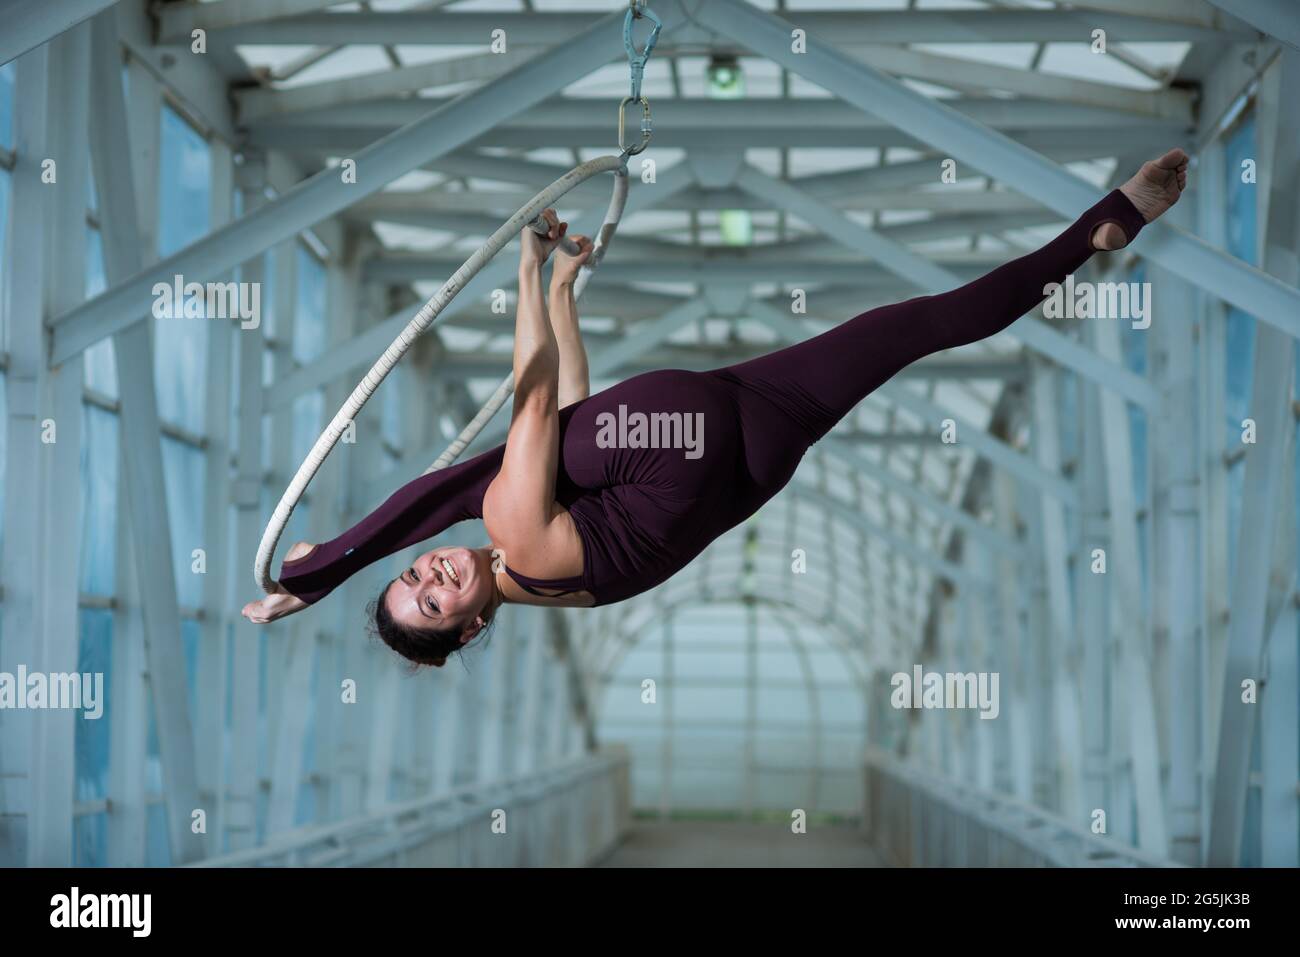 An air gymnast makes a Russian splits on an air hoop suspended on a metal truss. circus actress on the airy ring. Stock Photo